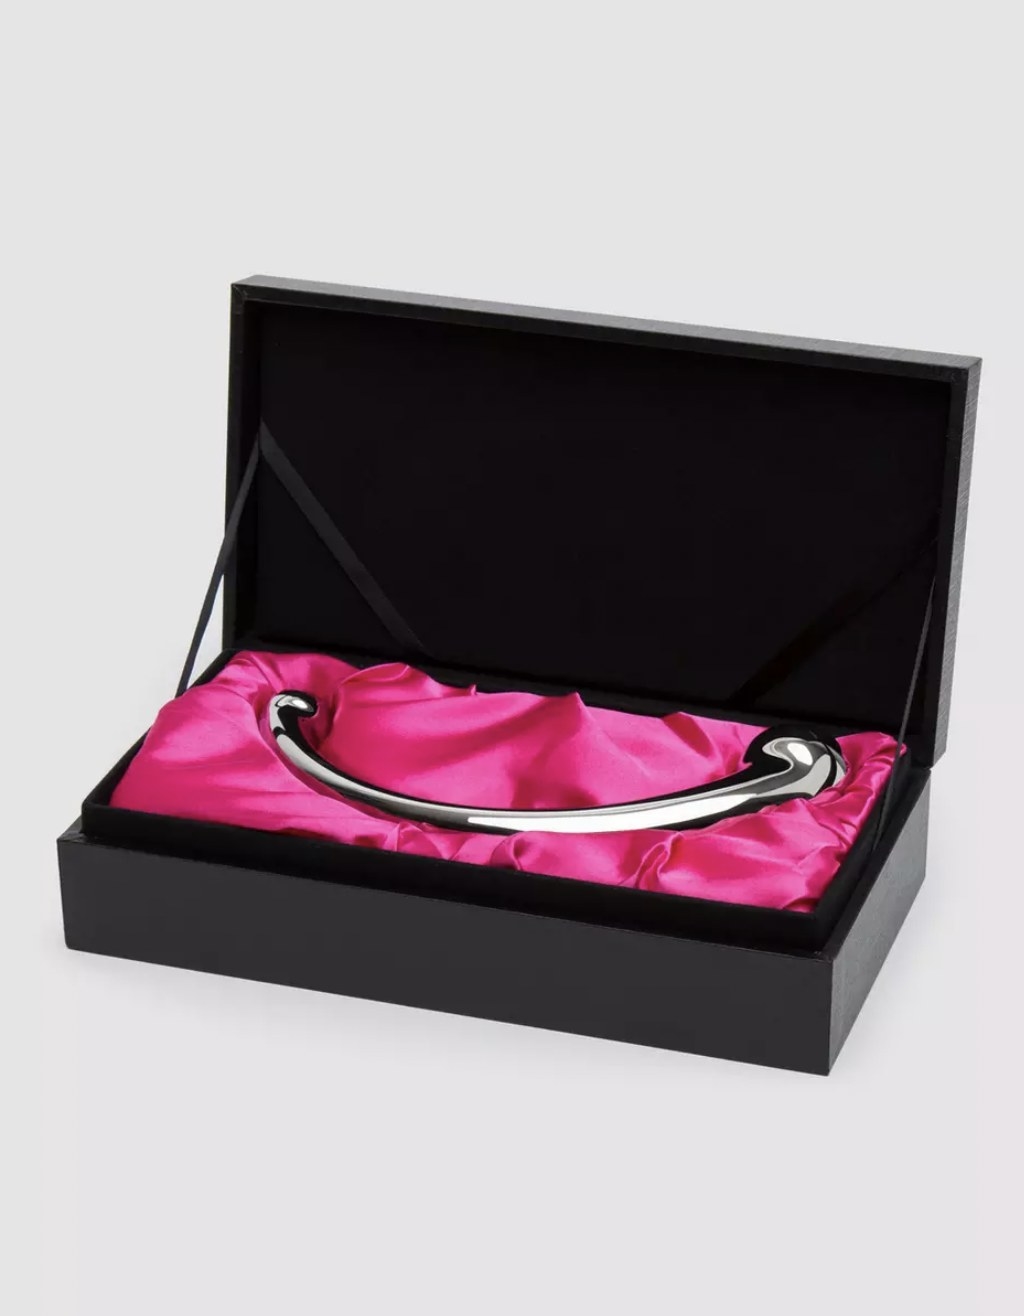 The silver dildo resting in its pink satin cushion in black case